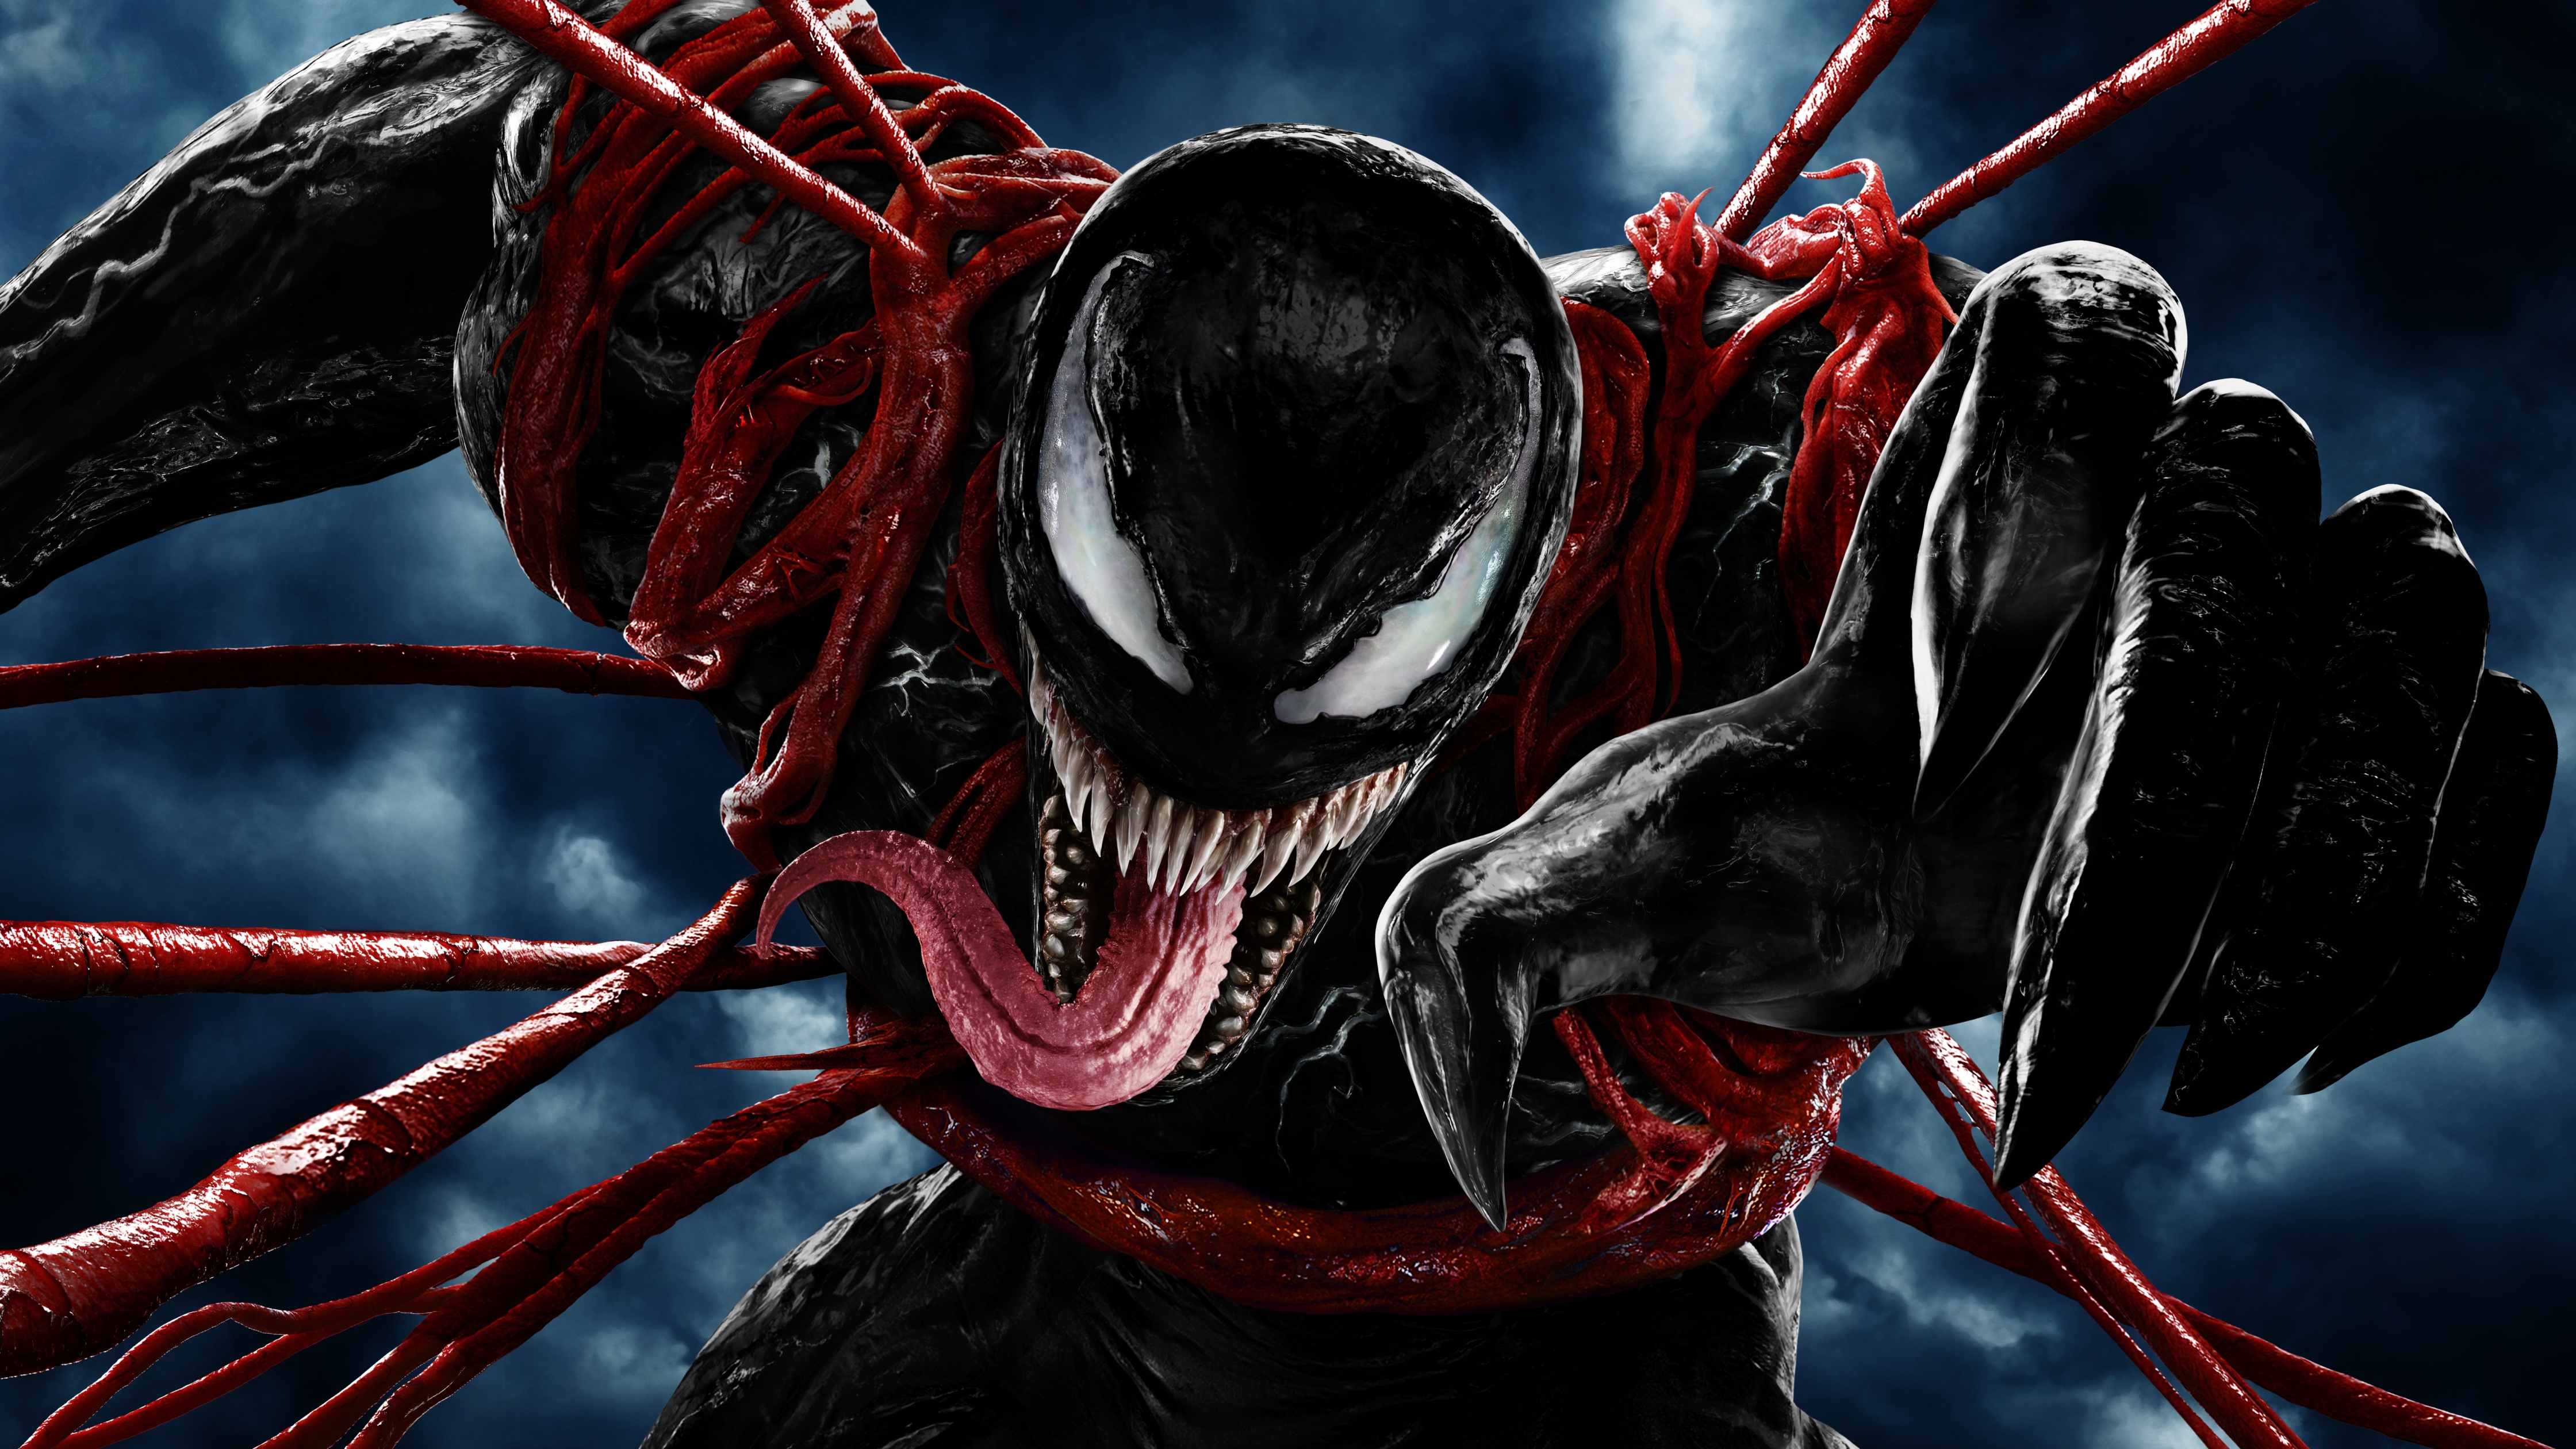 Venom: Let There Be Carnage Wallpaper 4K, 2021 Movies, Movies, #6772